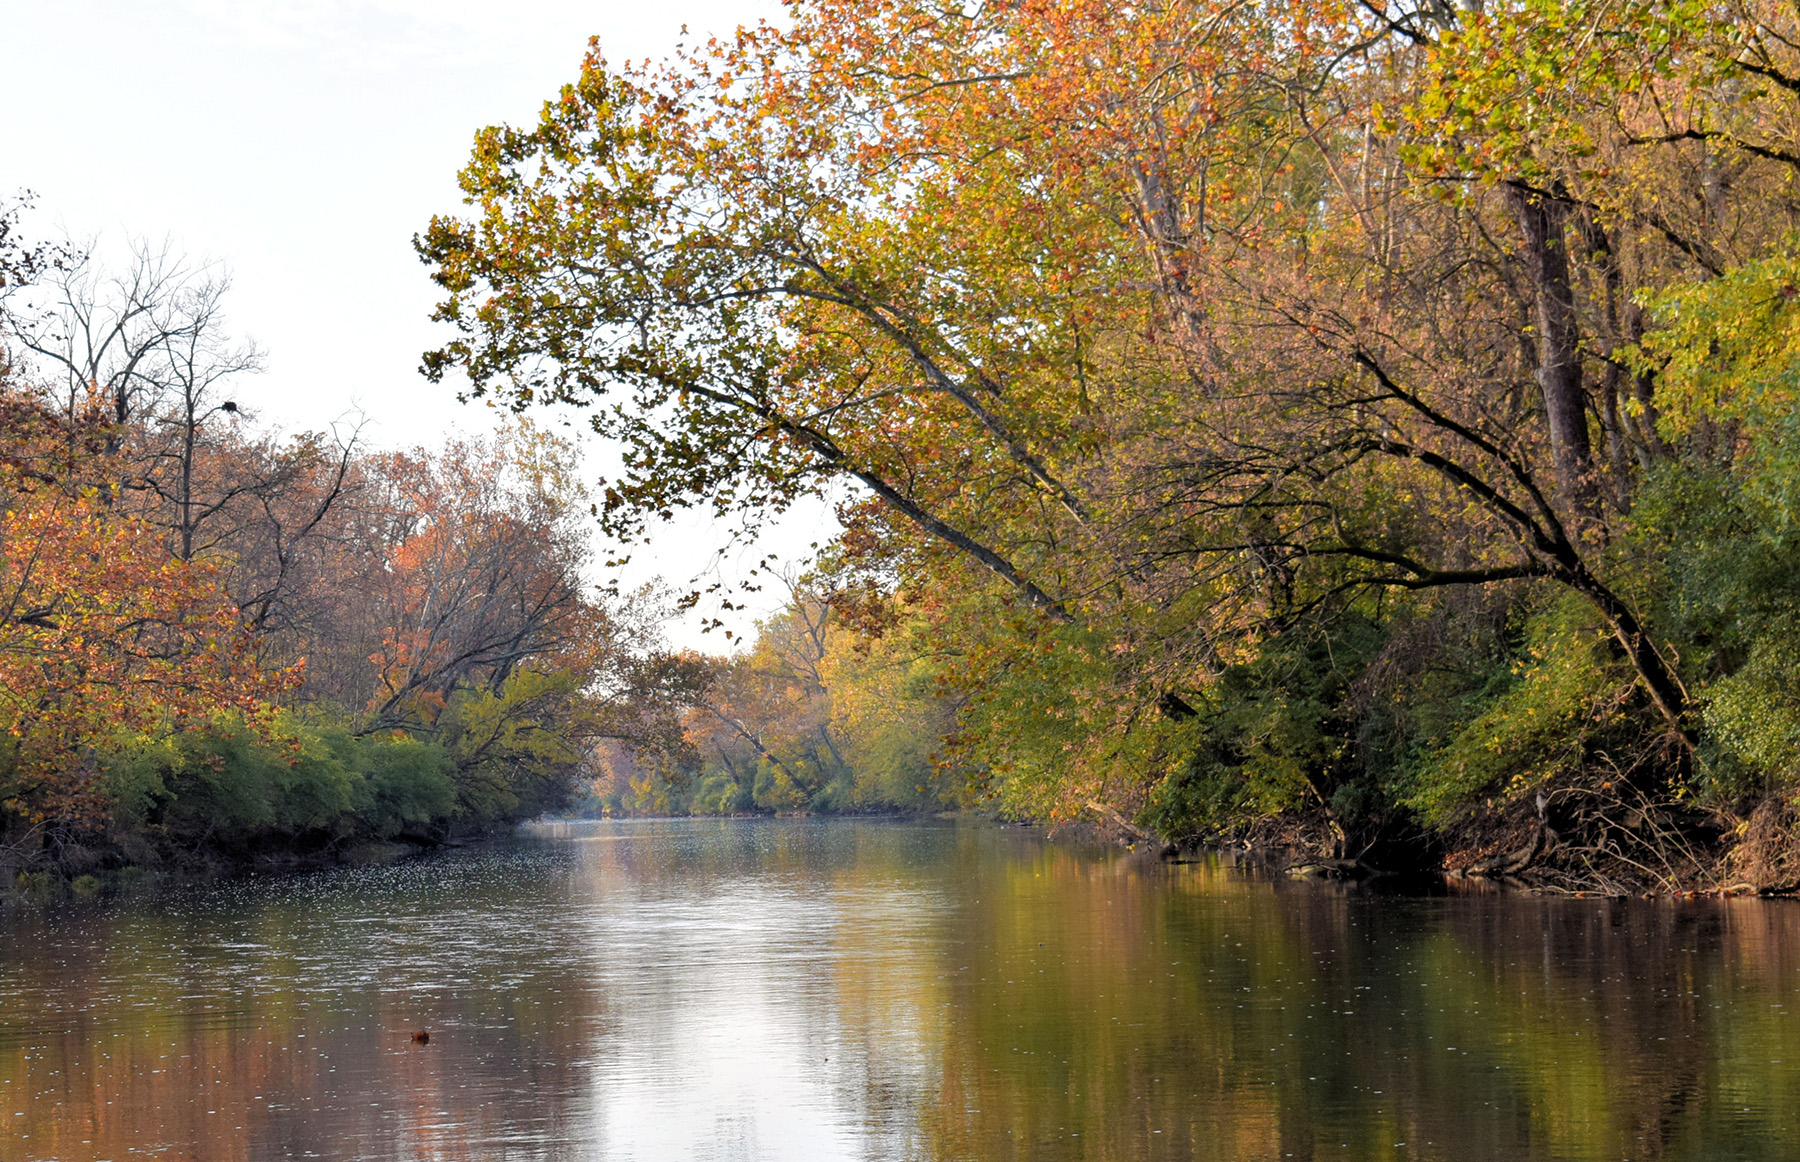 Photograph shows a body of water with trees with golden leaves on its banks. 